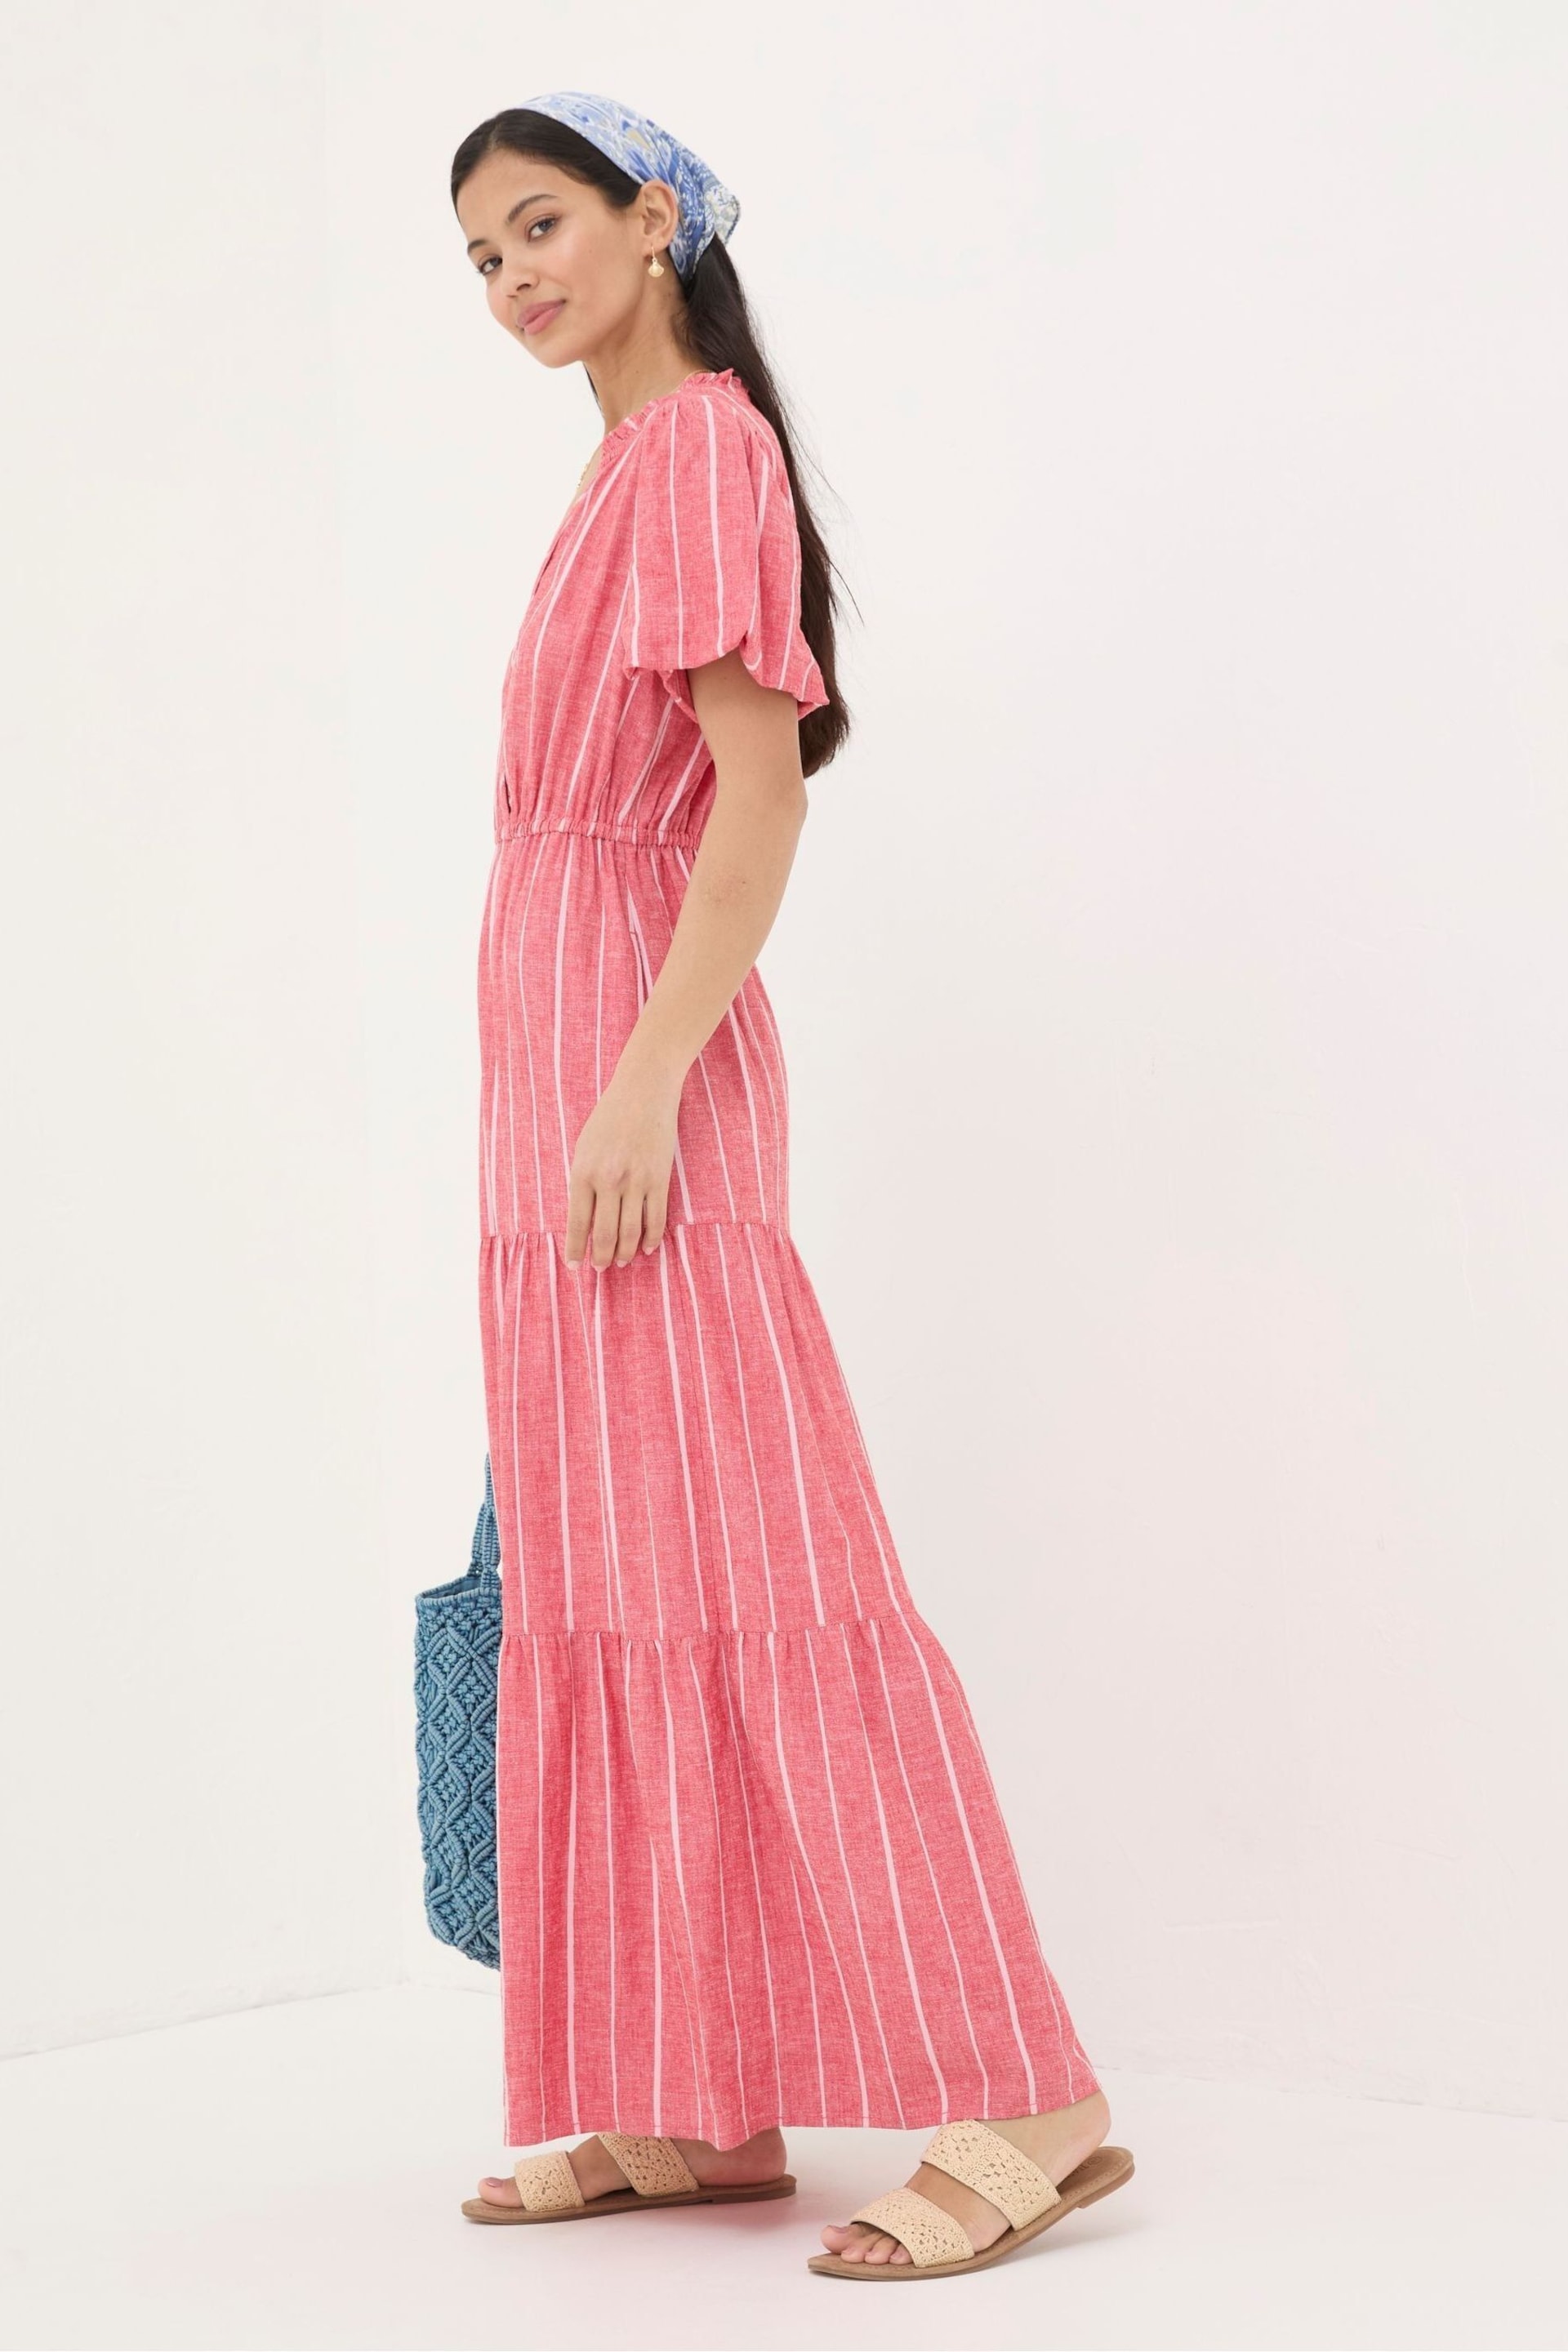 FatFace Red Stripe Maxi Dress - Image 1 of 6